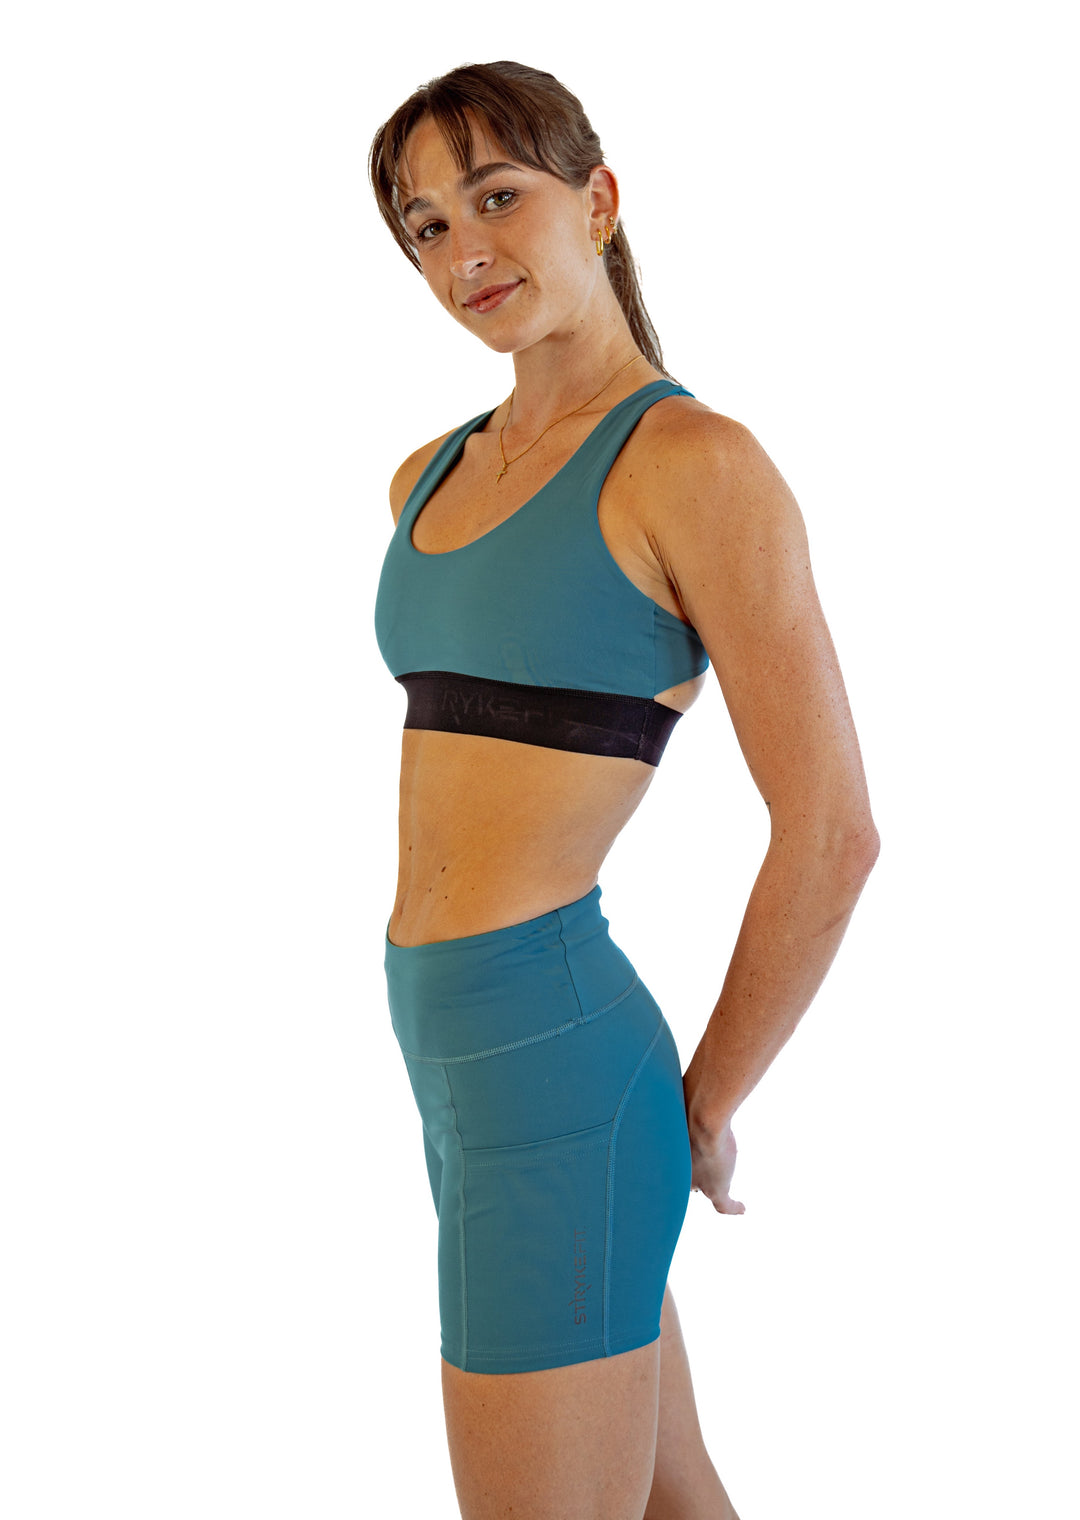 The FIT CROP TOP is designed with a back phone pocket enabling you to store your phone comfortably. Listening to music, podcasts, or even just having your phone with you for personal security is a bonus on any run. The racerback straps follow the curve of your shoulder blades to allow your arms to move freely while offering maximum support.